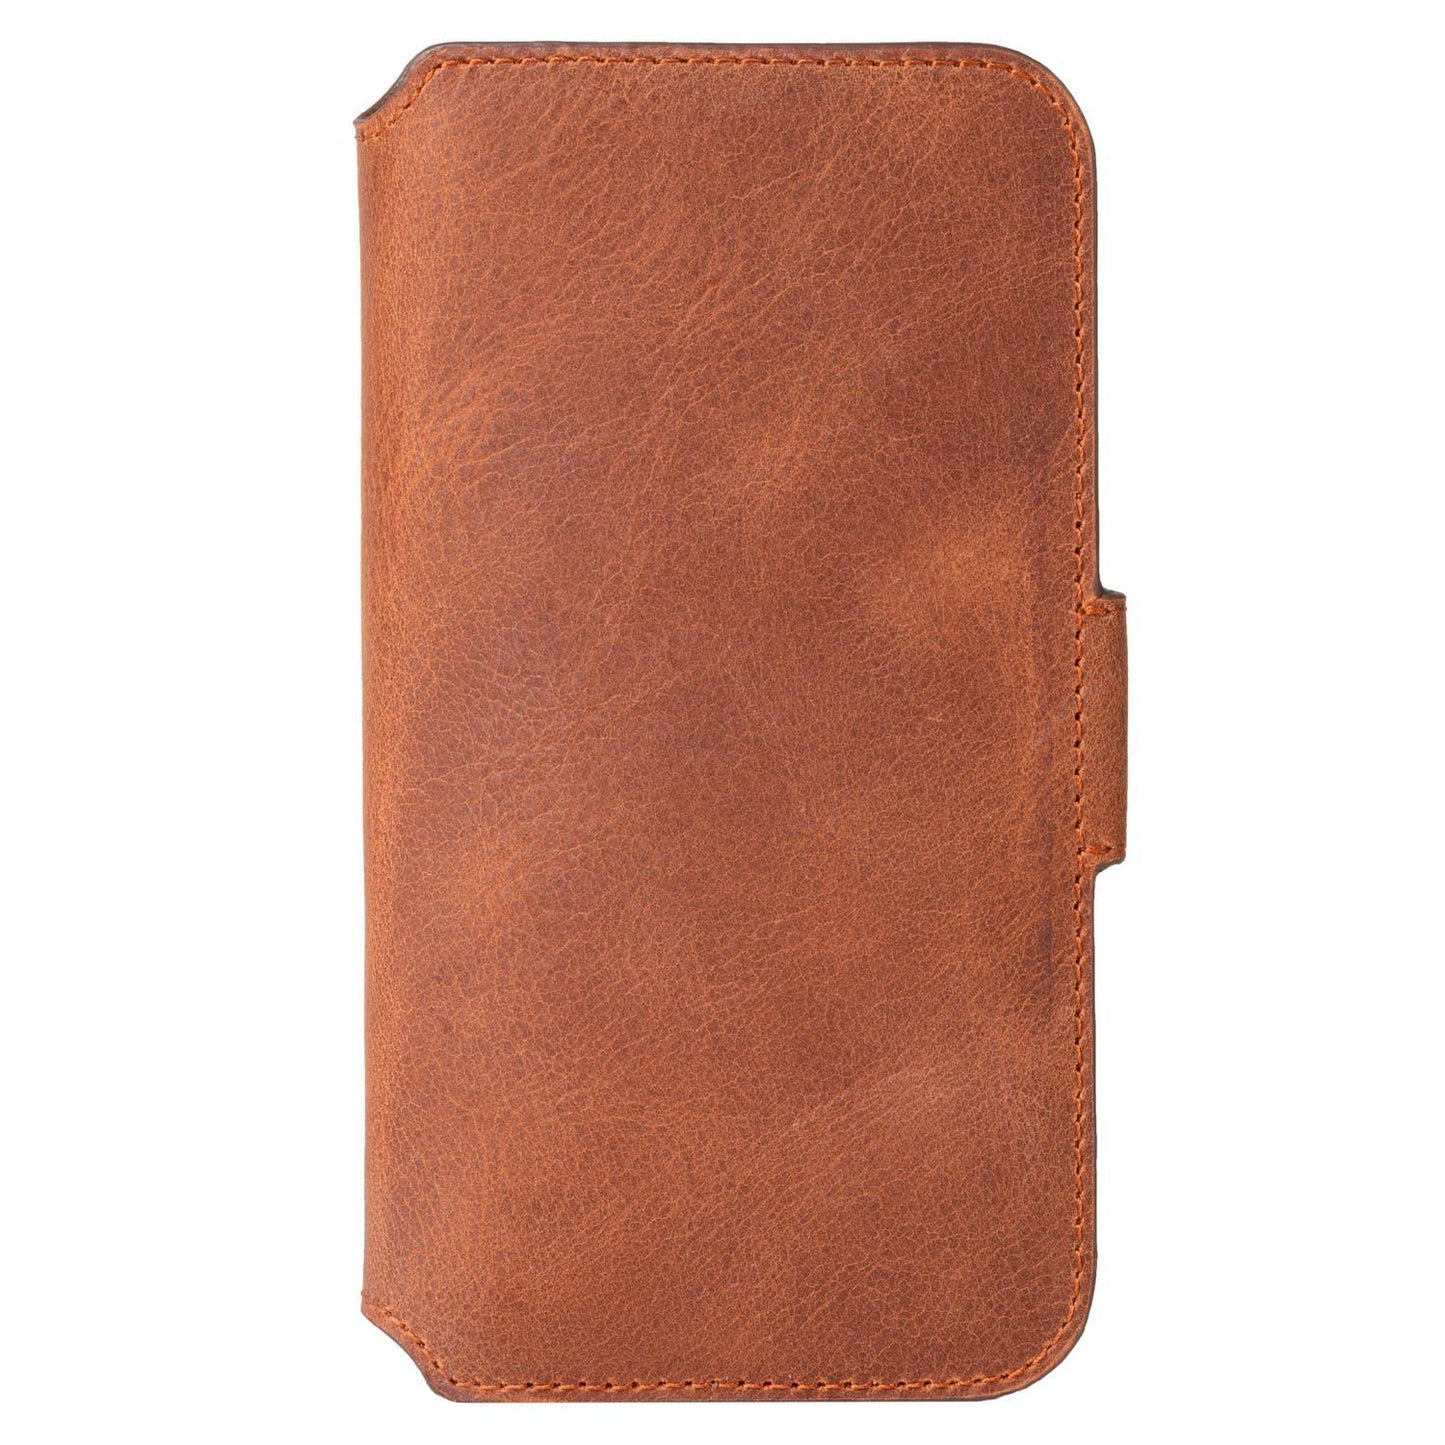 Sunne Phone Wallet for iPhone 12 Pro Max